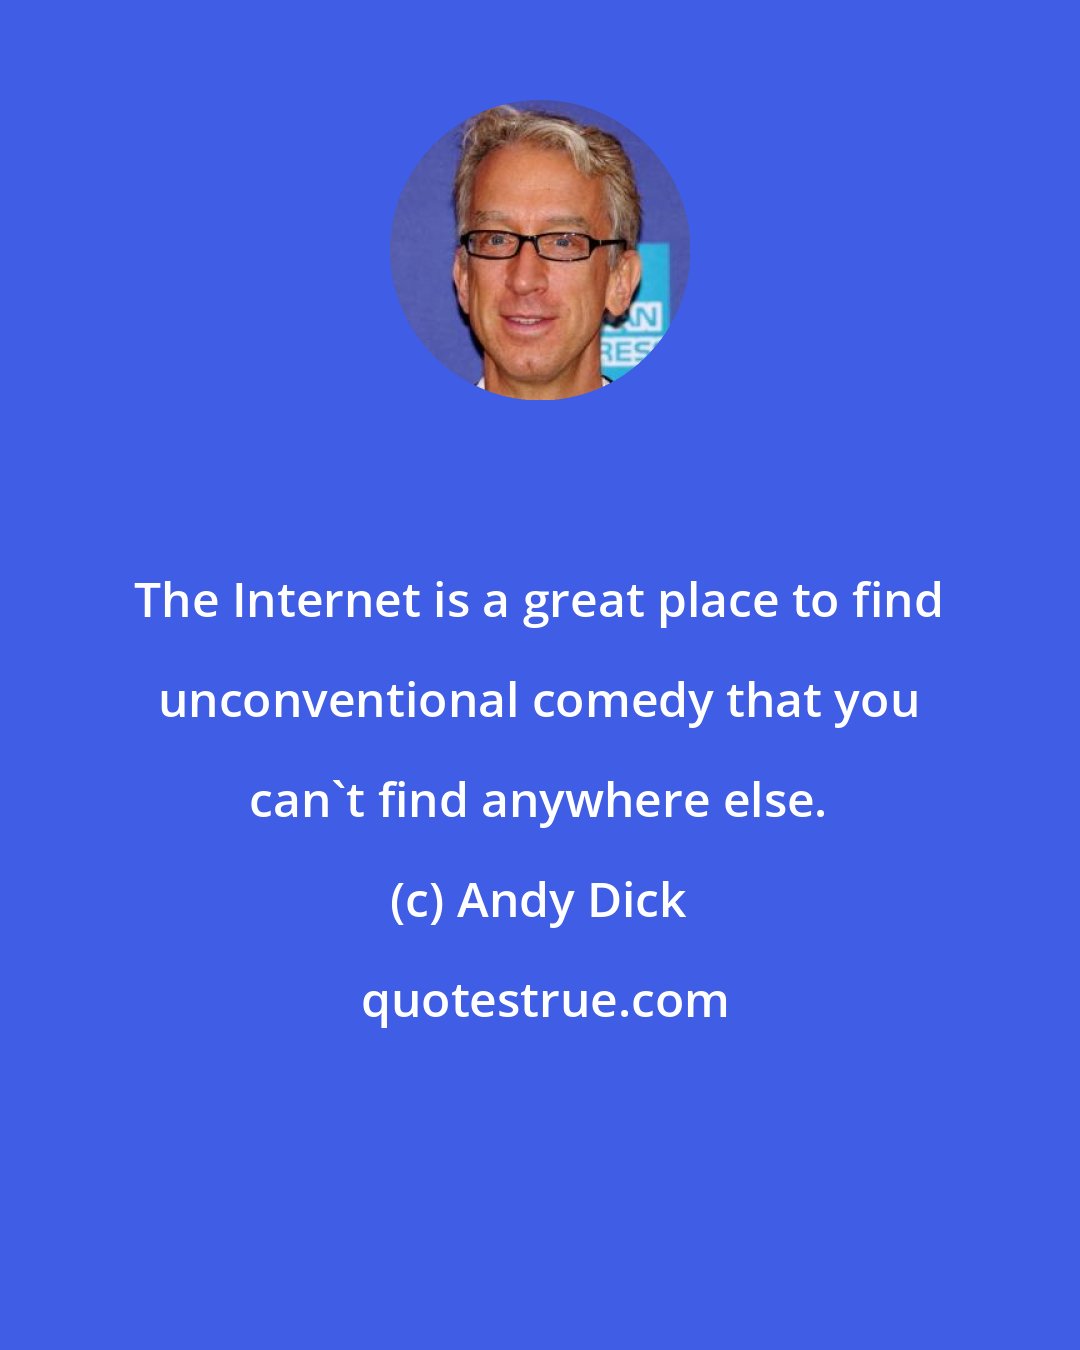 Andy Dick: The Internet is a great place to find unconventional comedy that you can't find anywhere else.